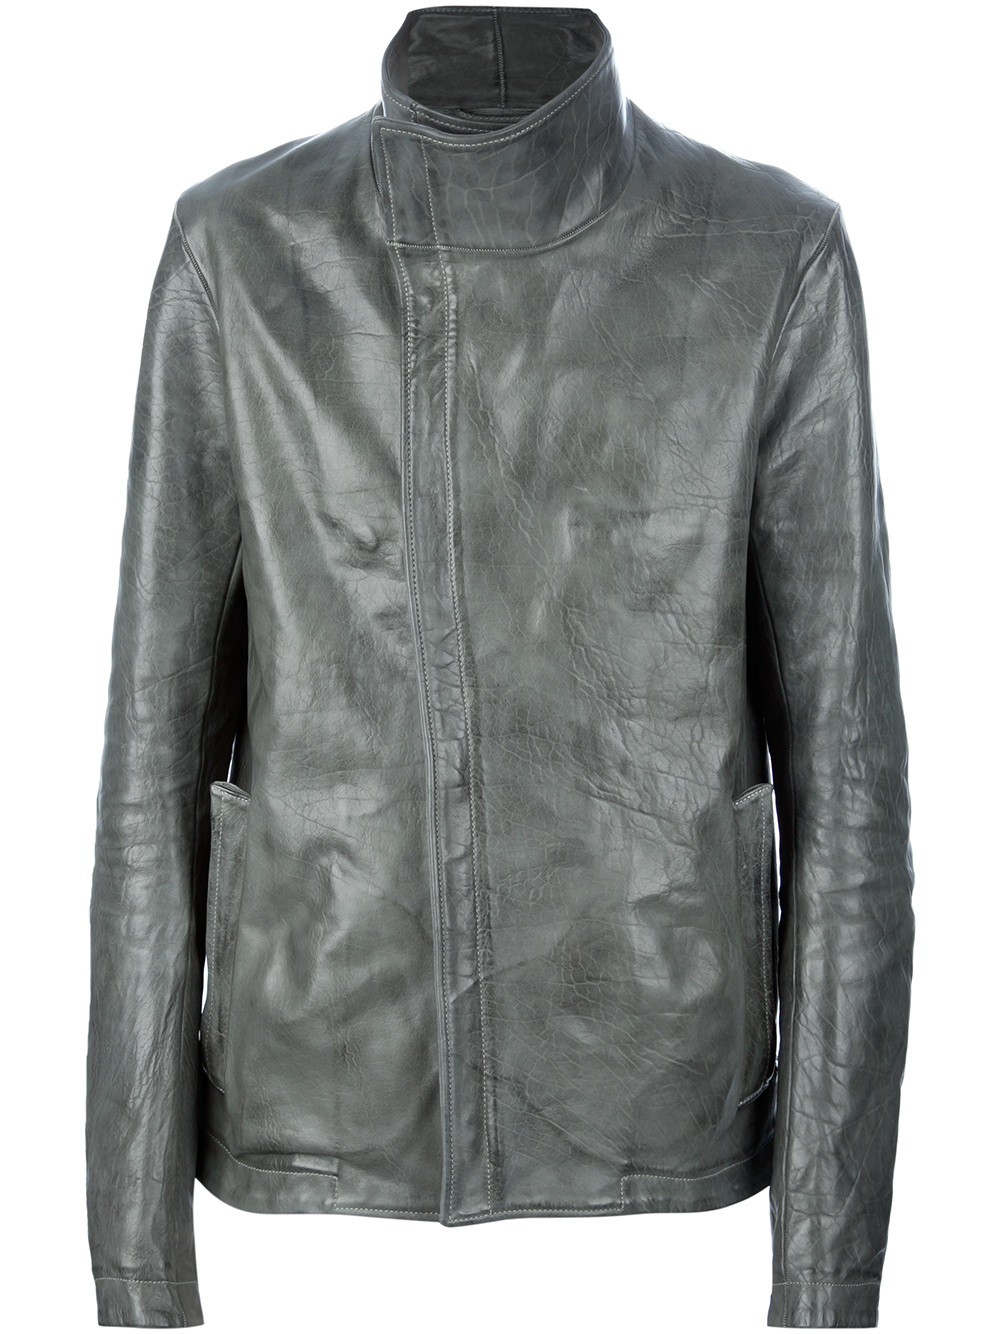 Carol Christian Poell Buffalo Leather Jacket in Gray for Men | Lyst